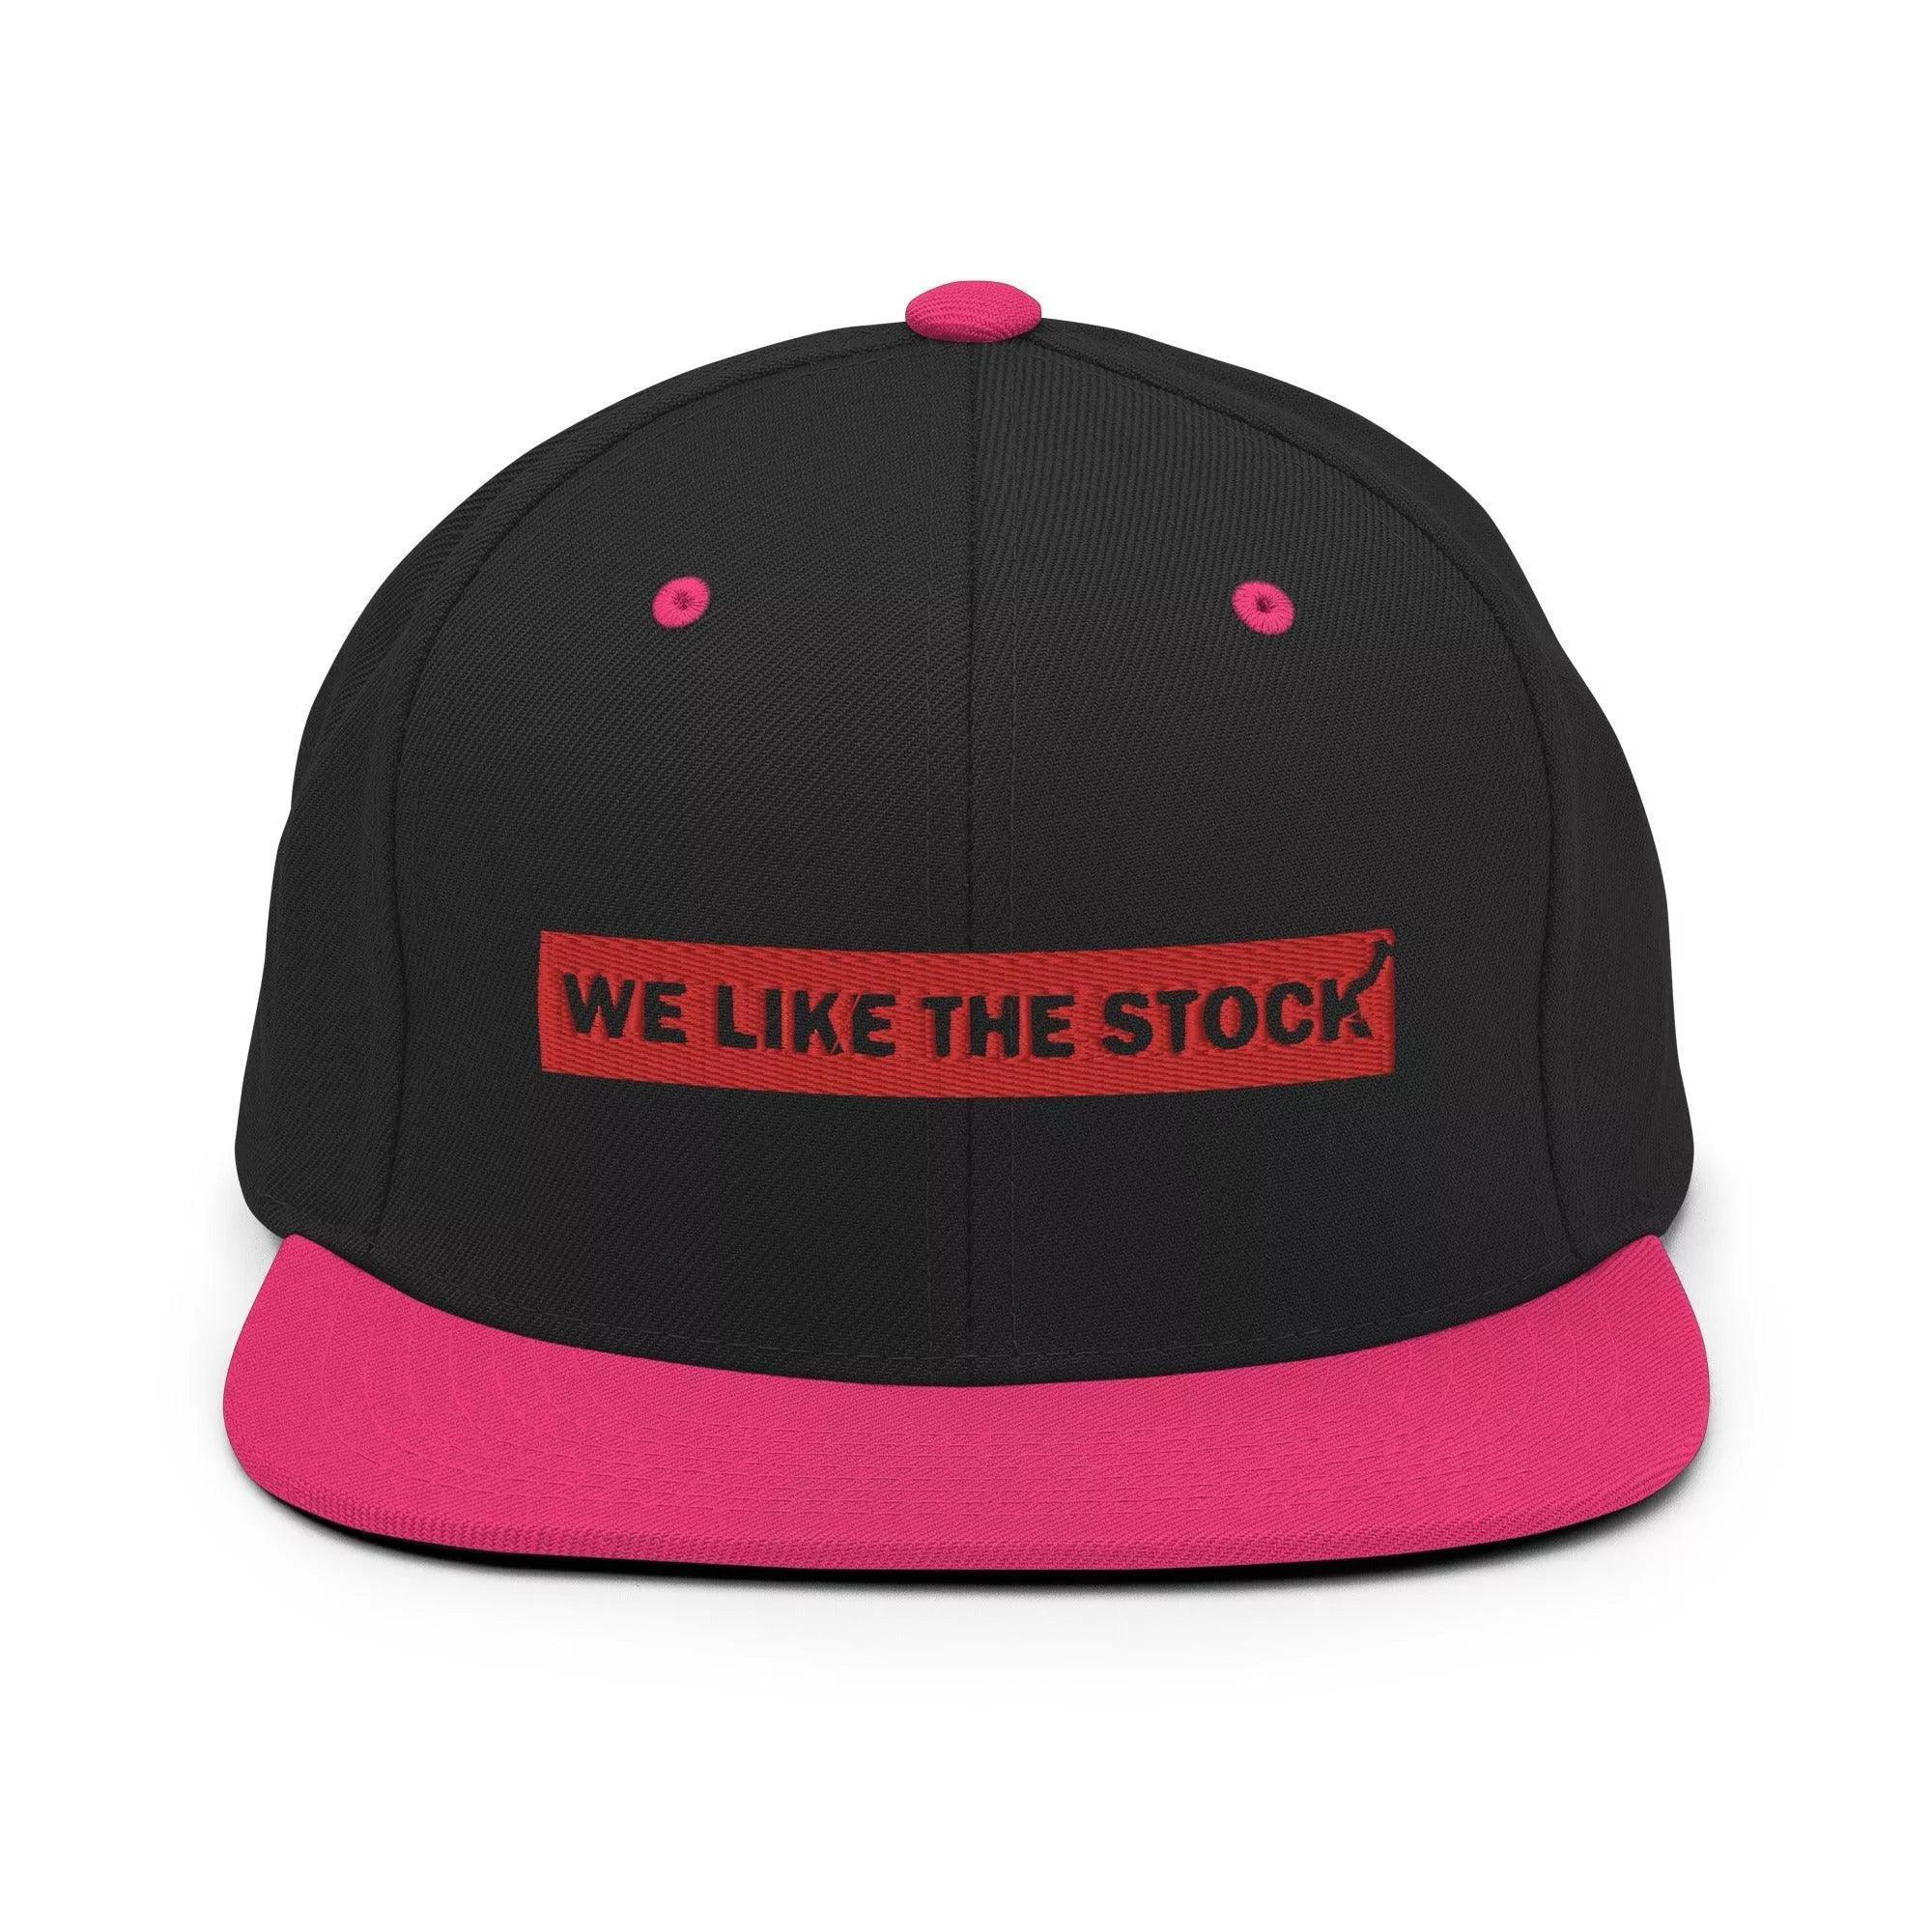 We Like The Stock Snapback Hat - InvestmenTees